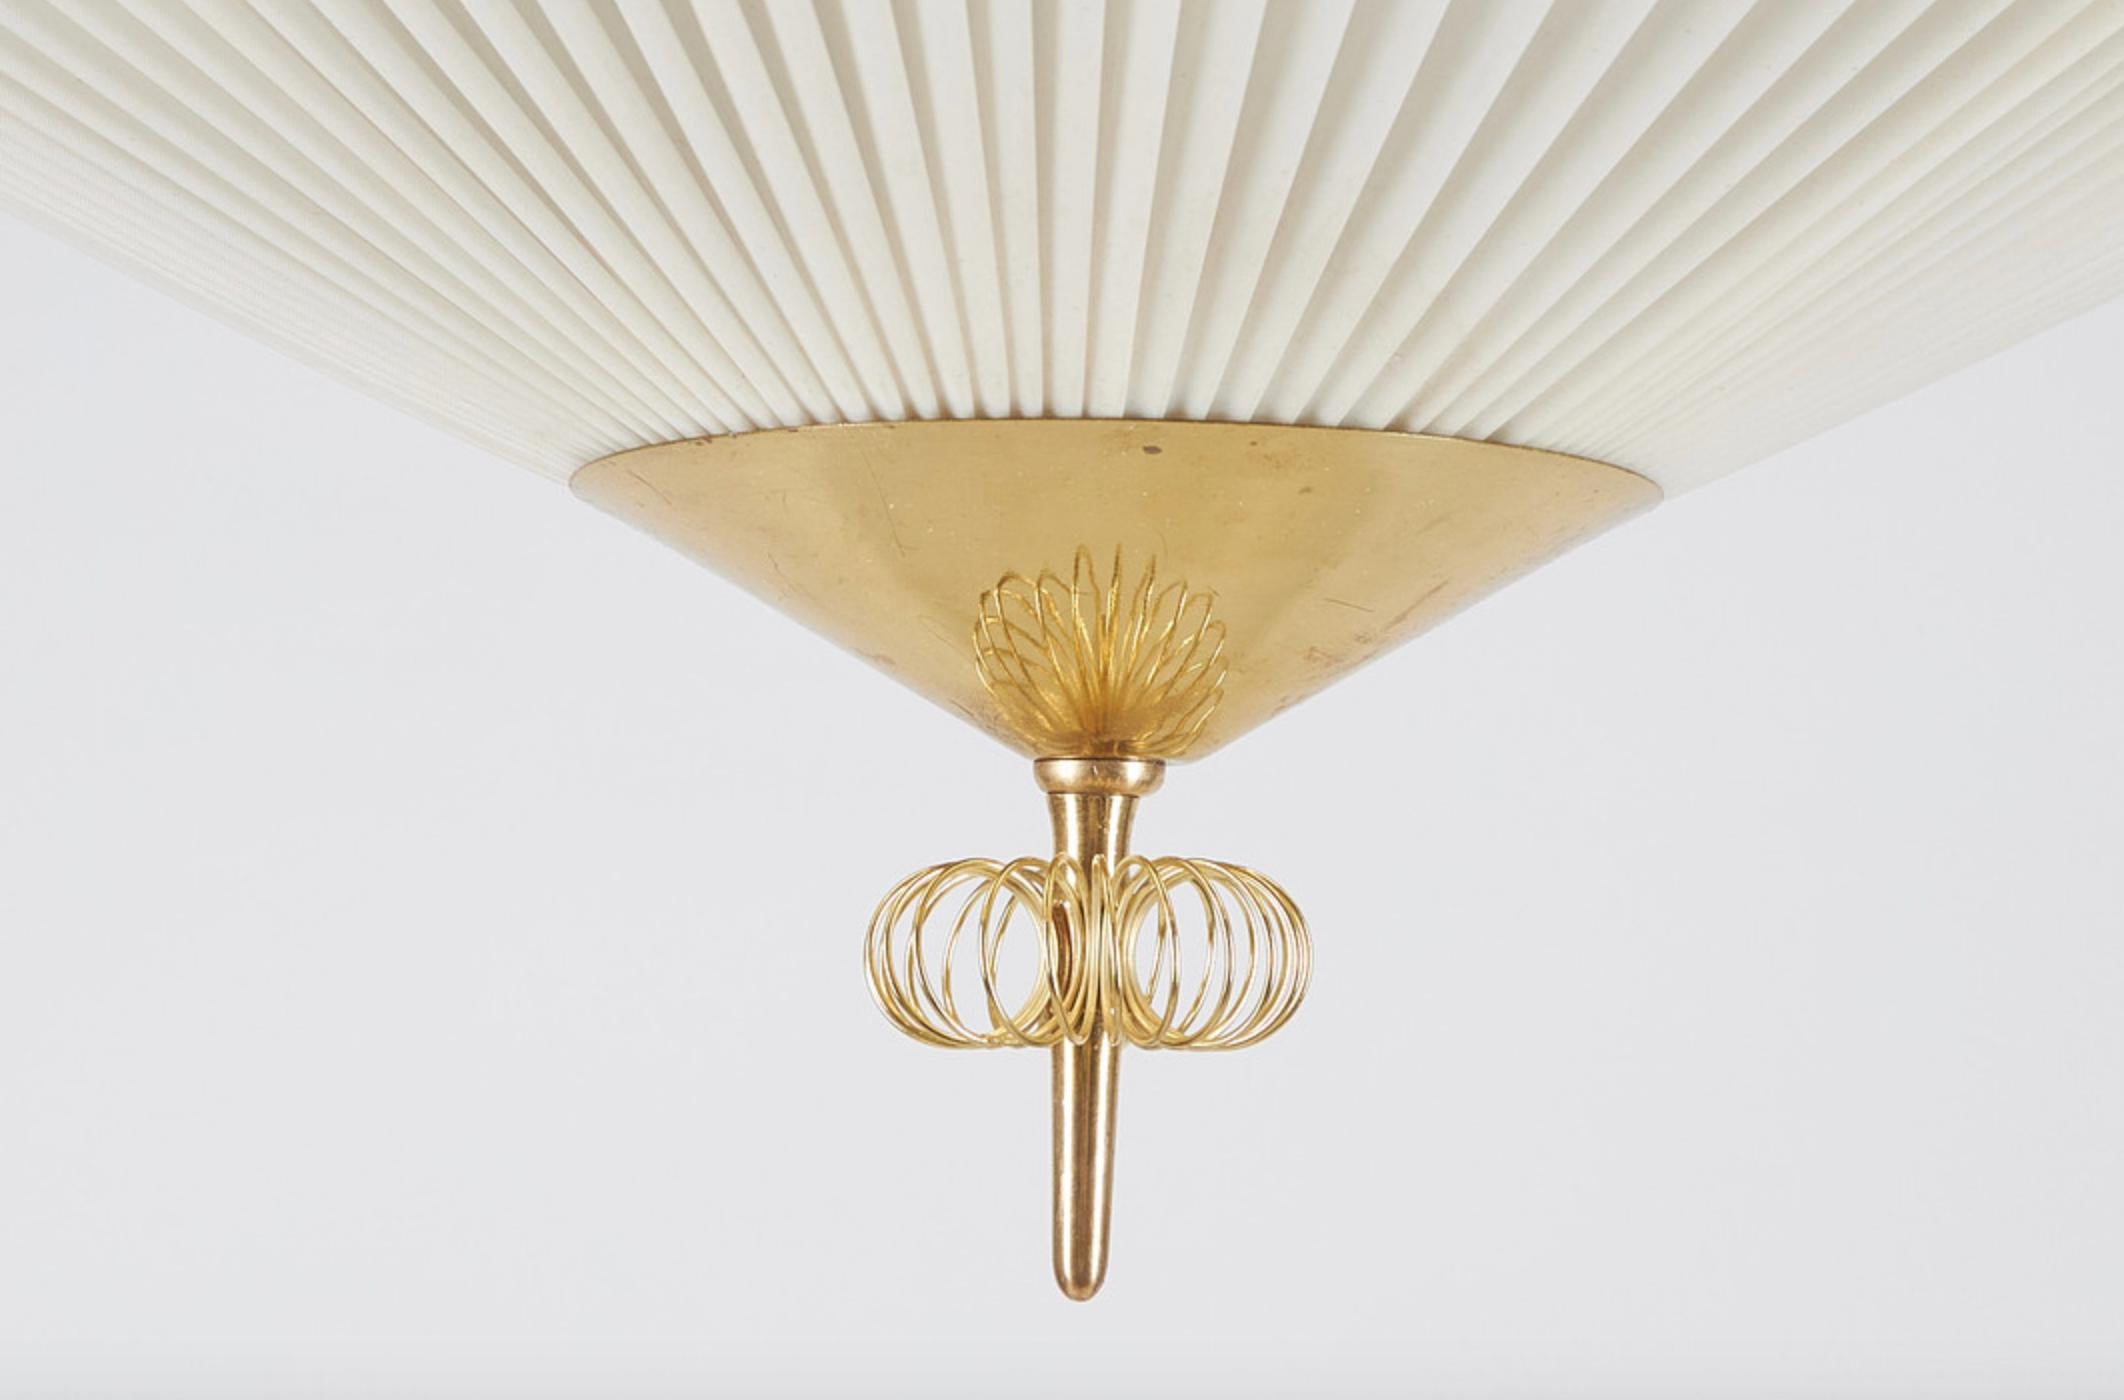 Finnish Large Ceiling Light by Paavo Tynell, Model K5-27, Idman. For Sale